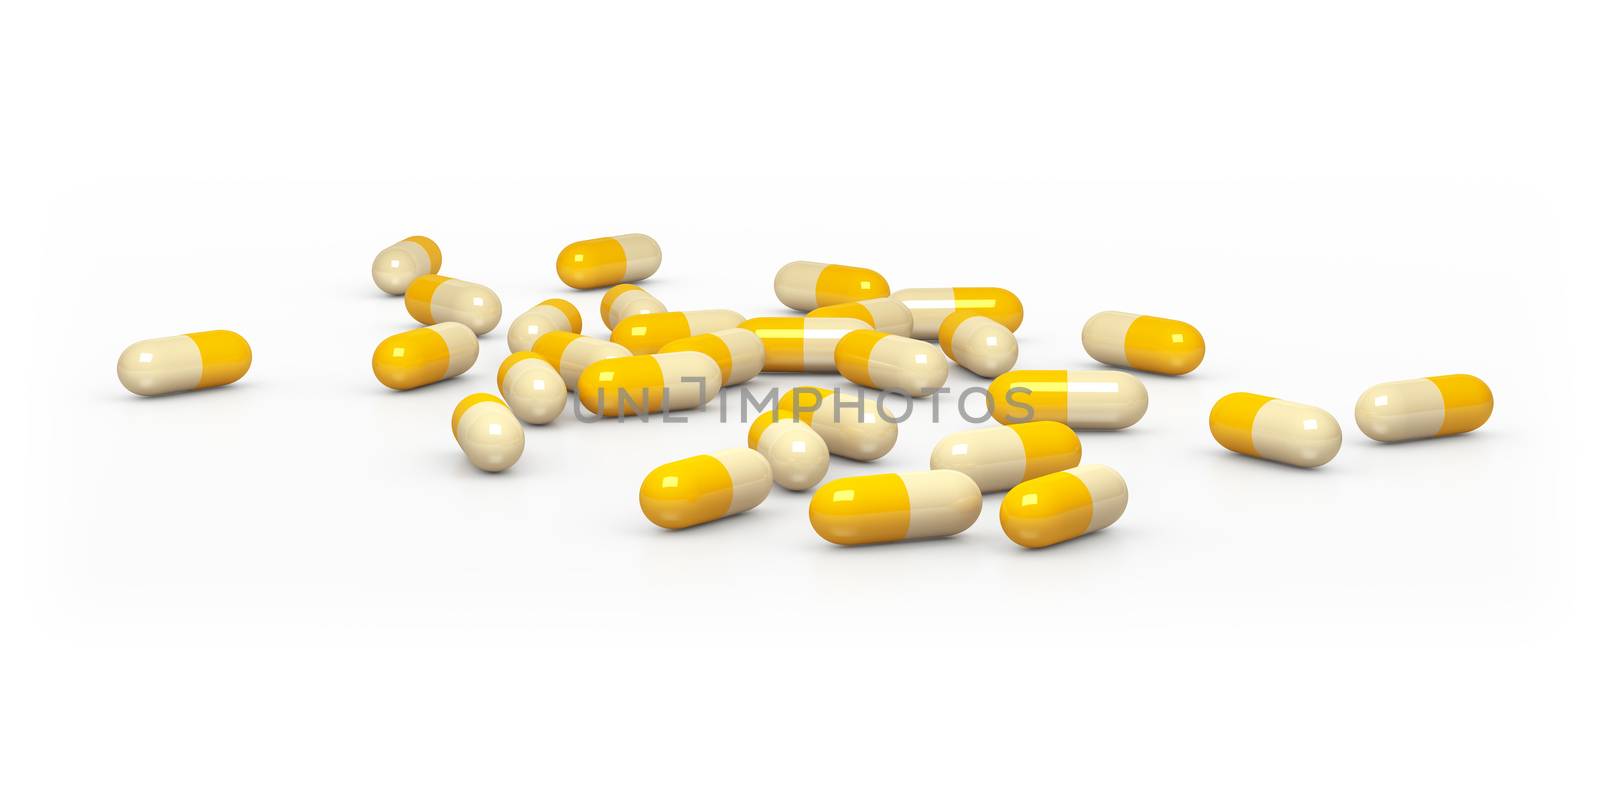 An image of some yellow pills on a white background